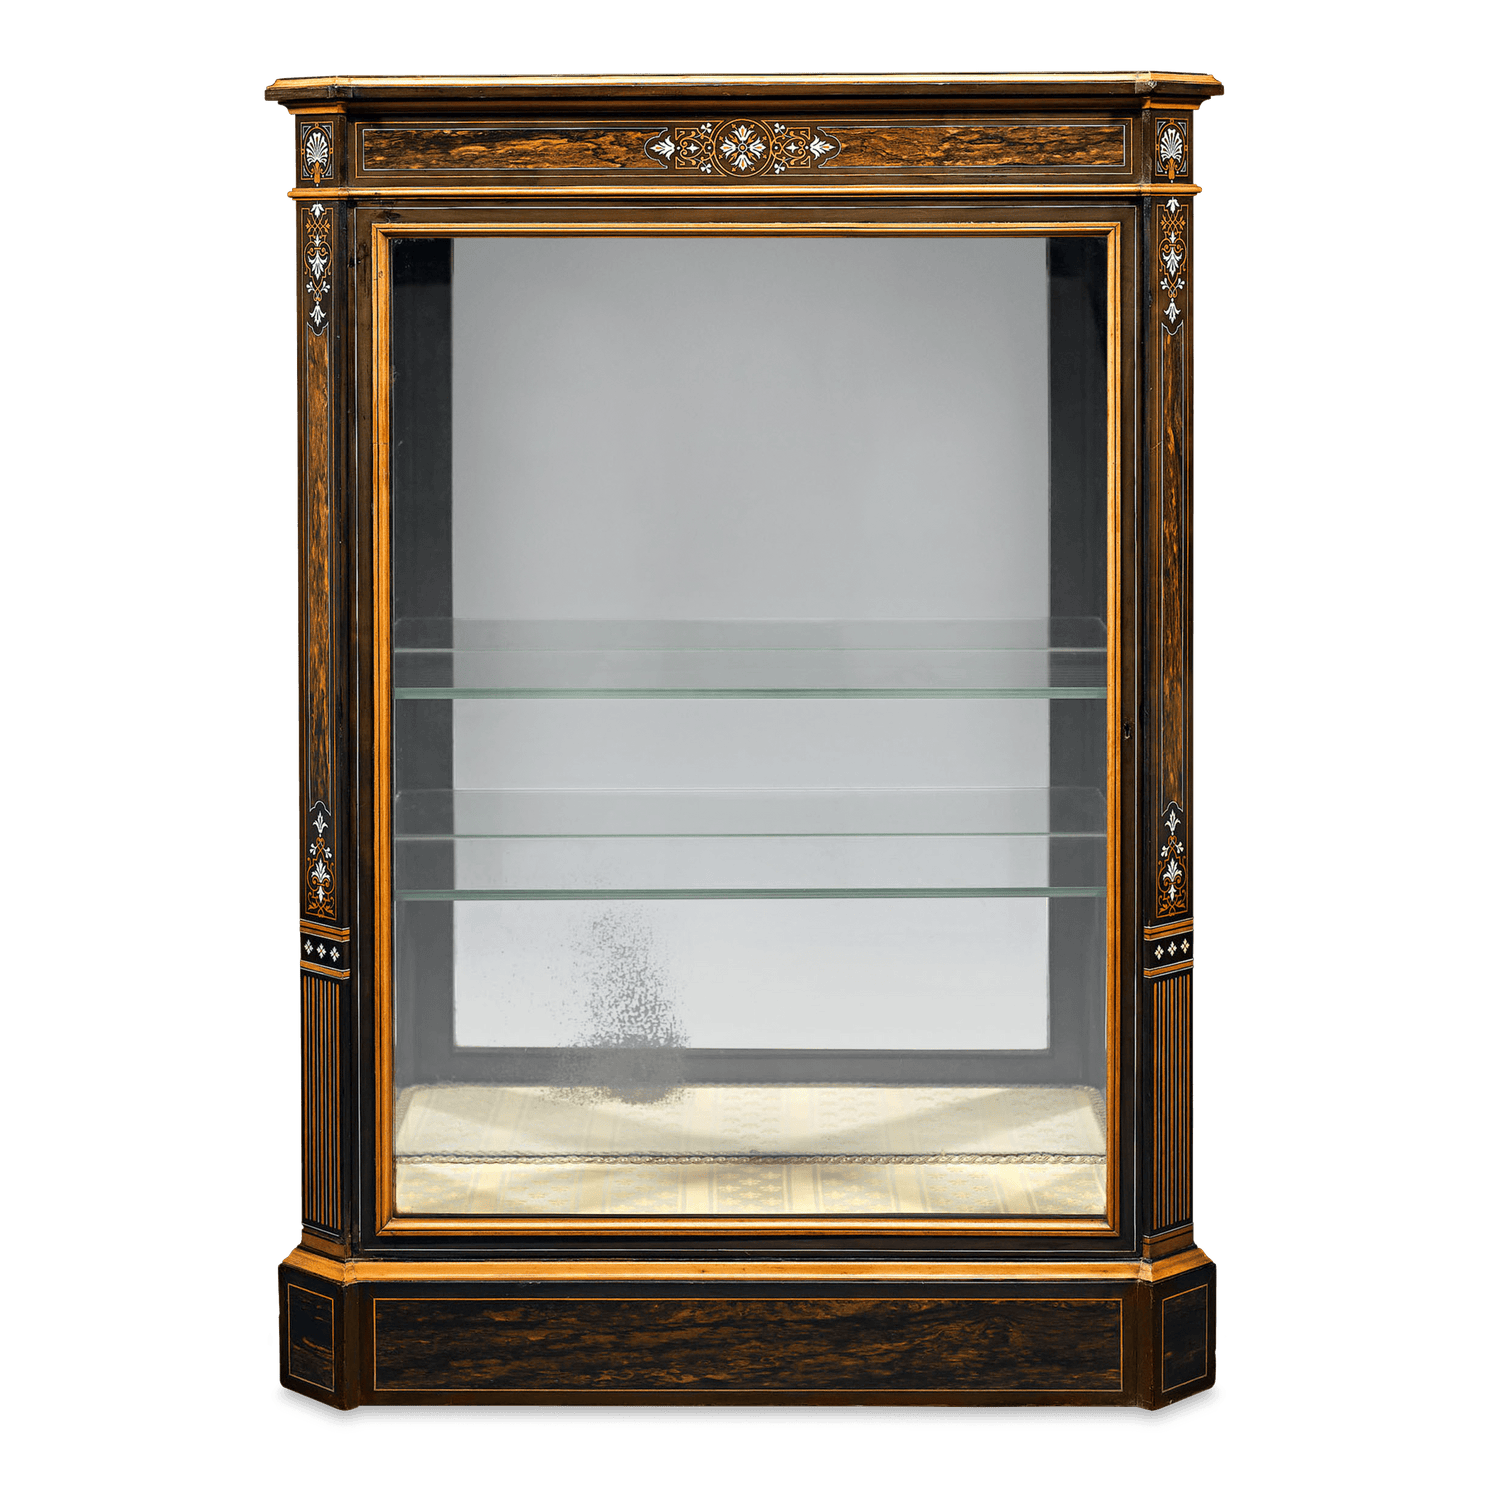 Intricate details and rare materials recommend this Victorian vitrine